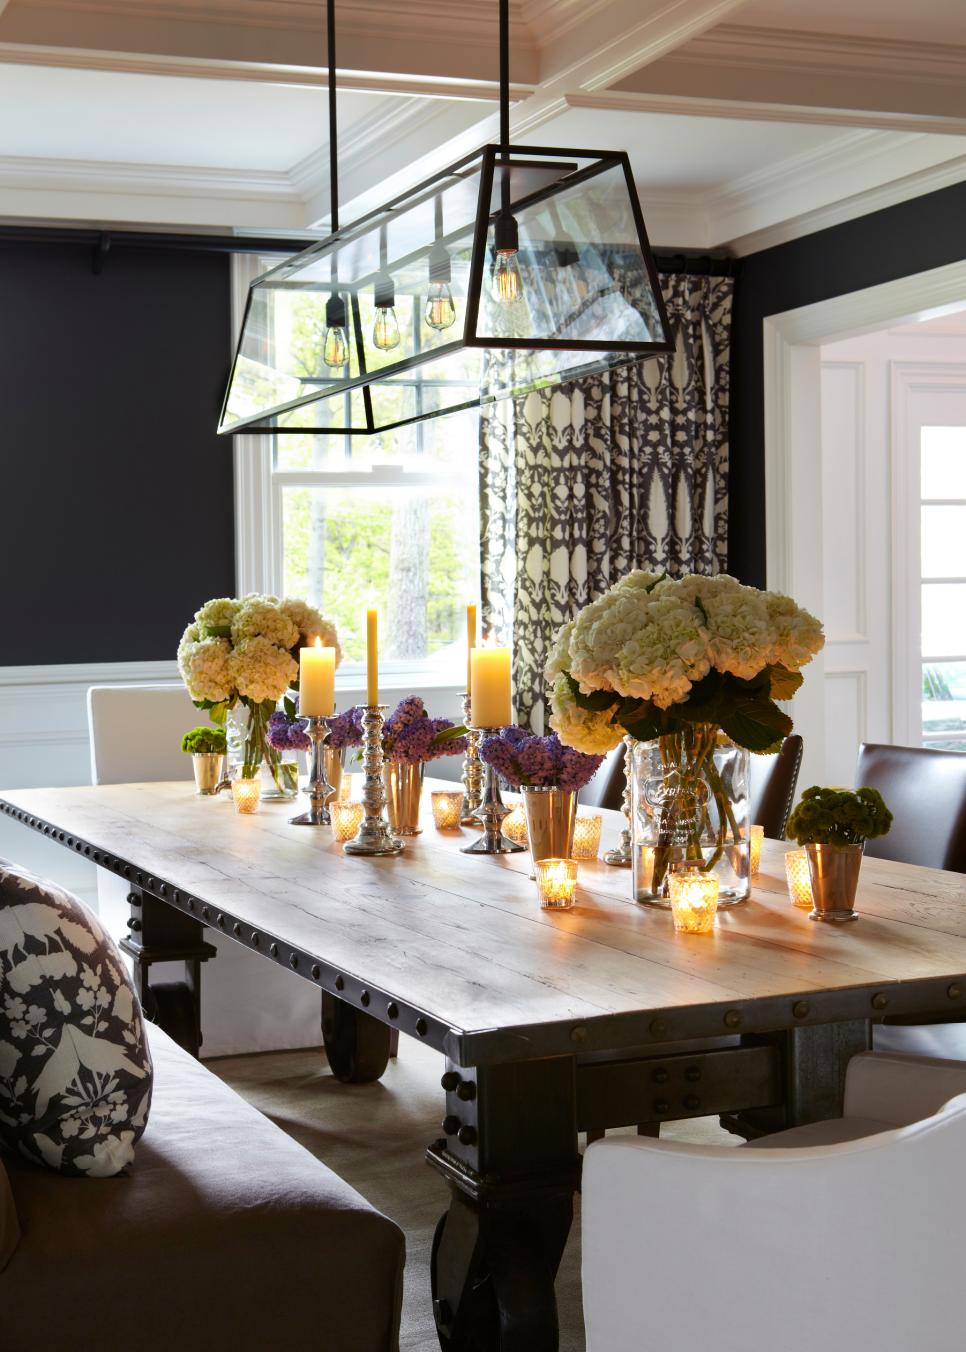 Dining Room With Industrial-Chic Table and Chandelier | HGTV